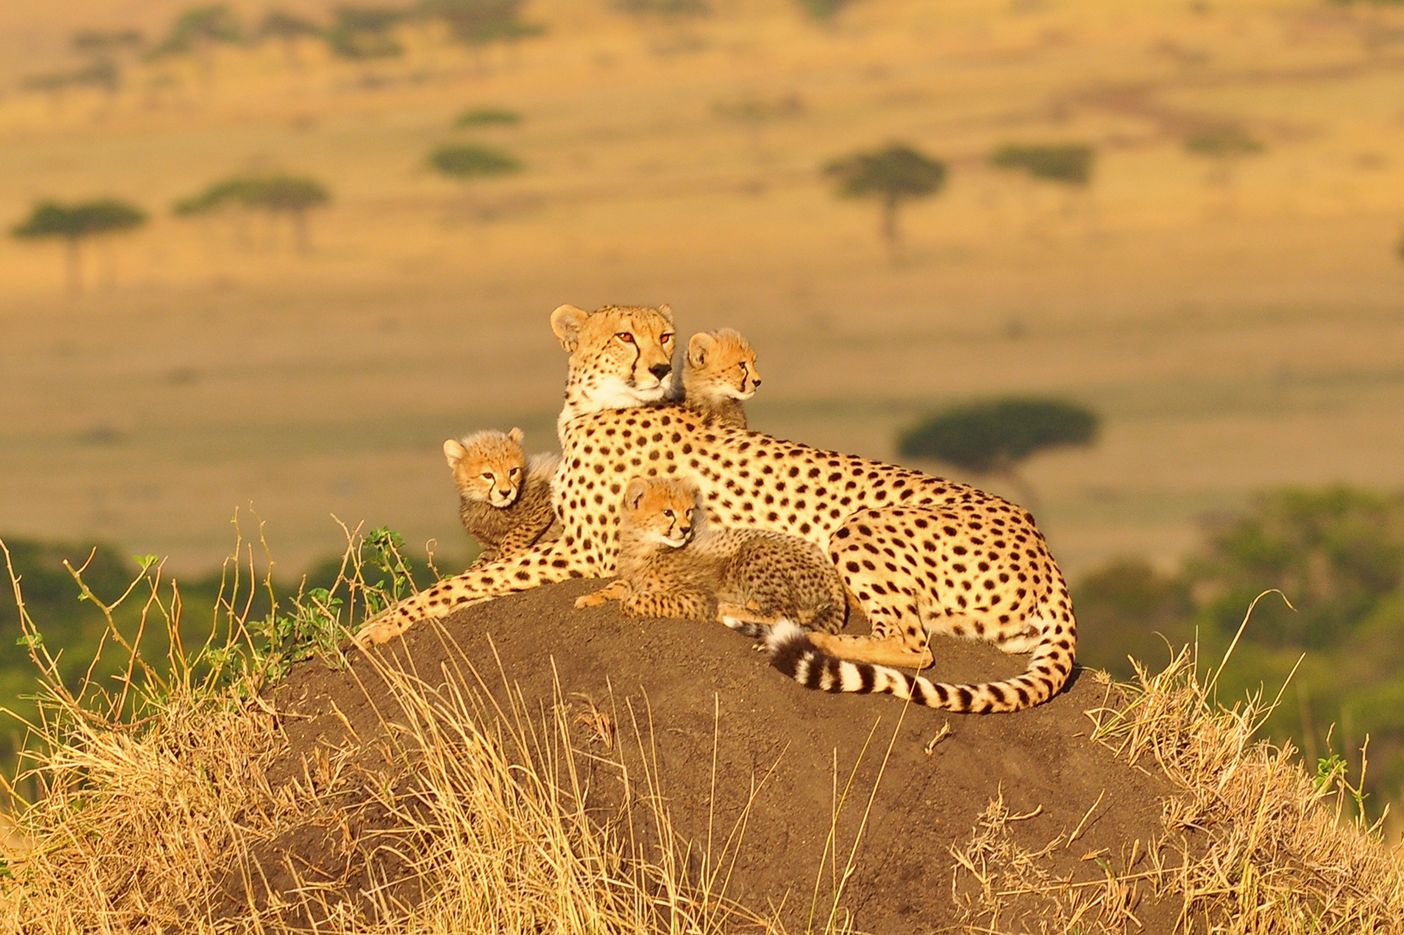 Cheetahs in Africa | Facts